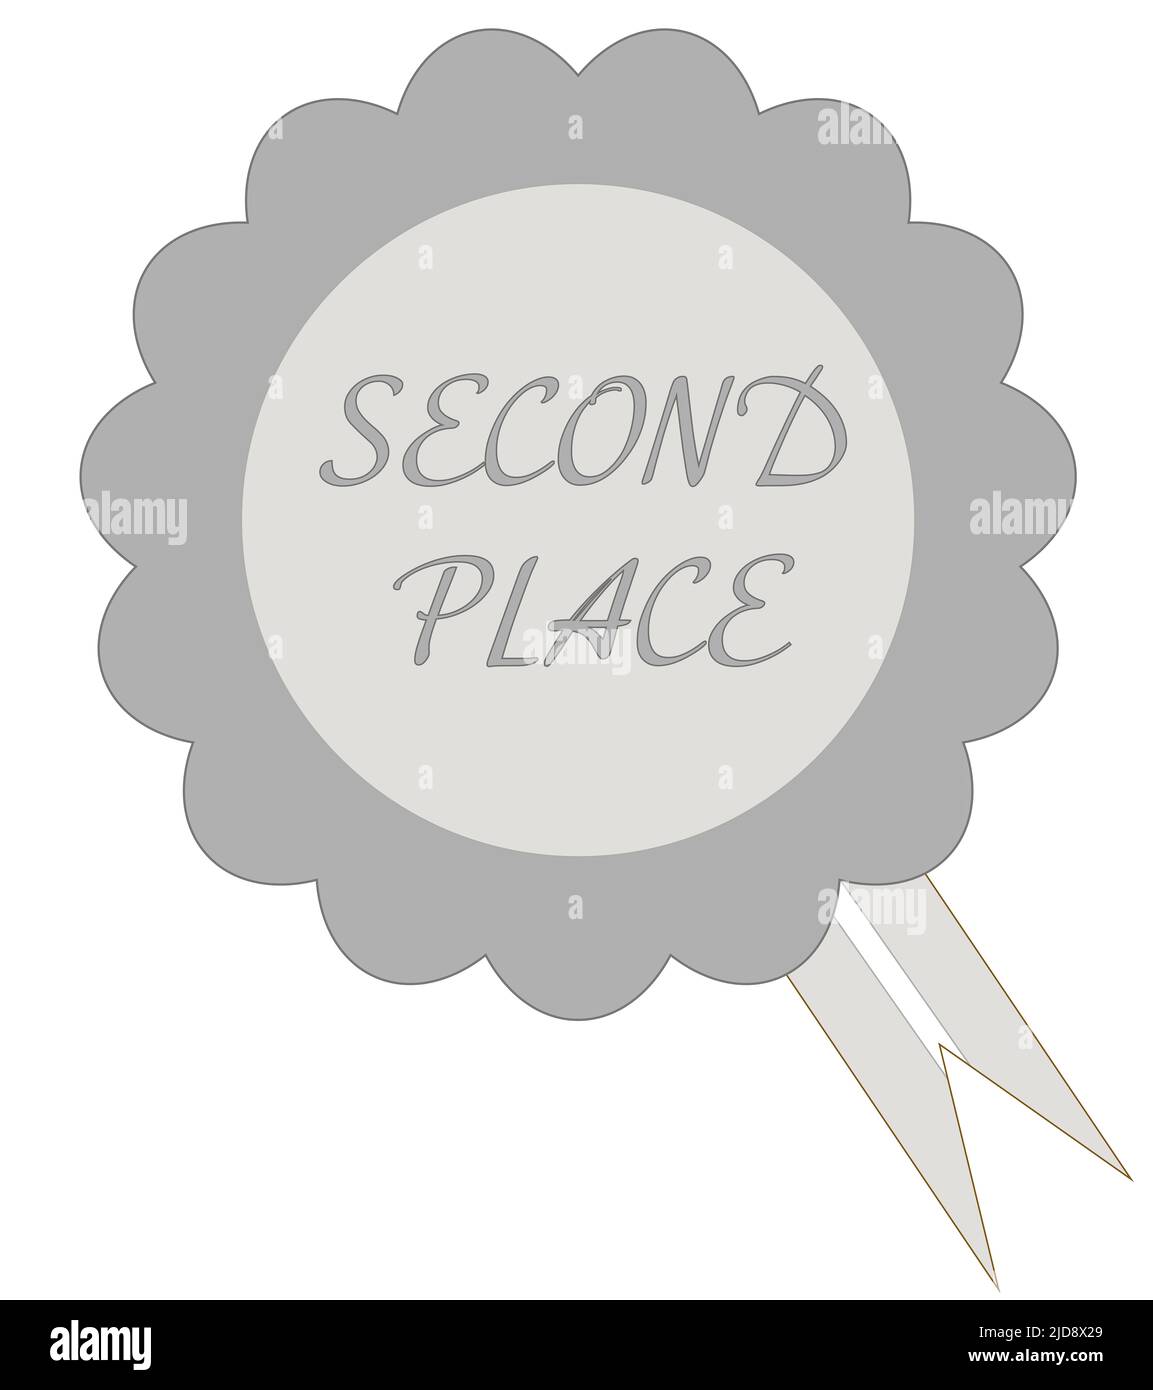 A graphic illustration of A second place rosette for use as an icon, logo or web decoration Stock Photo